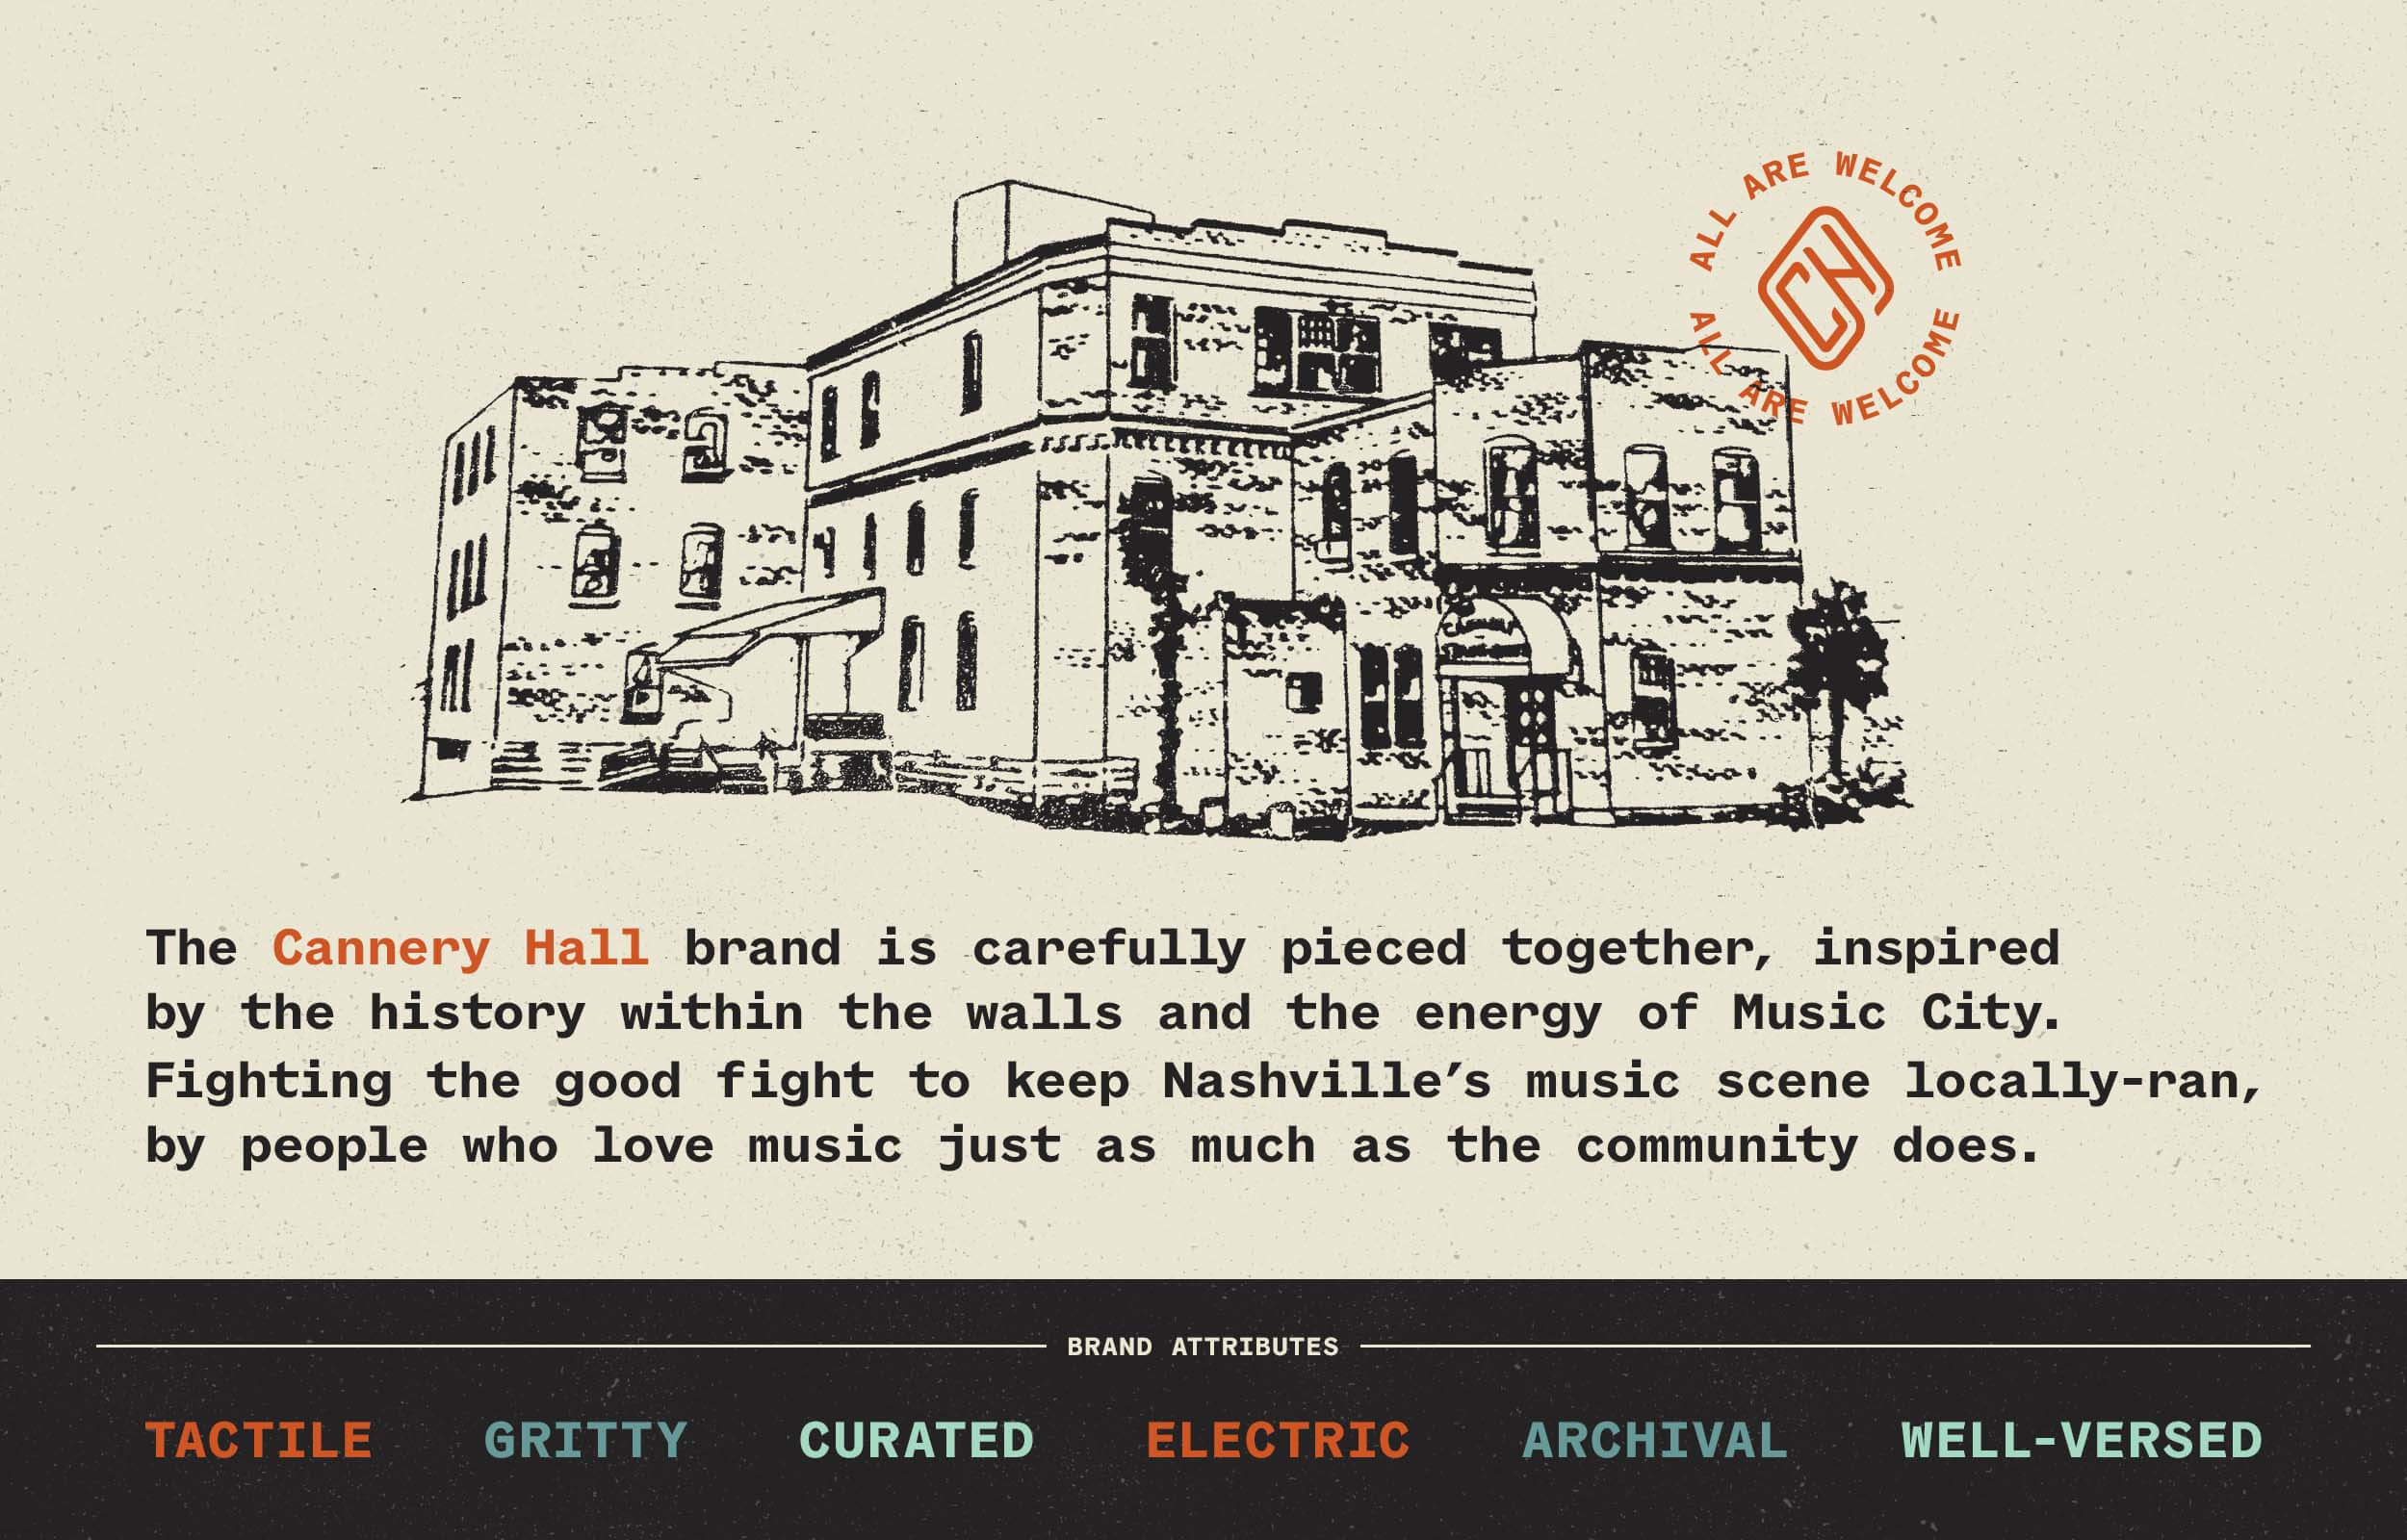 Overview of Cannery Hall brand and brand attributes: Tactile, Gritty, Curated, Electric, Archival, Well-versed.